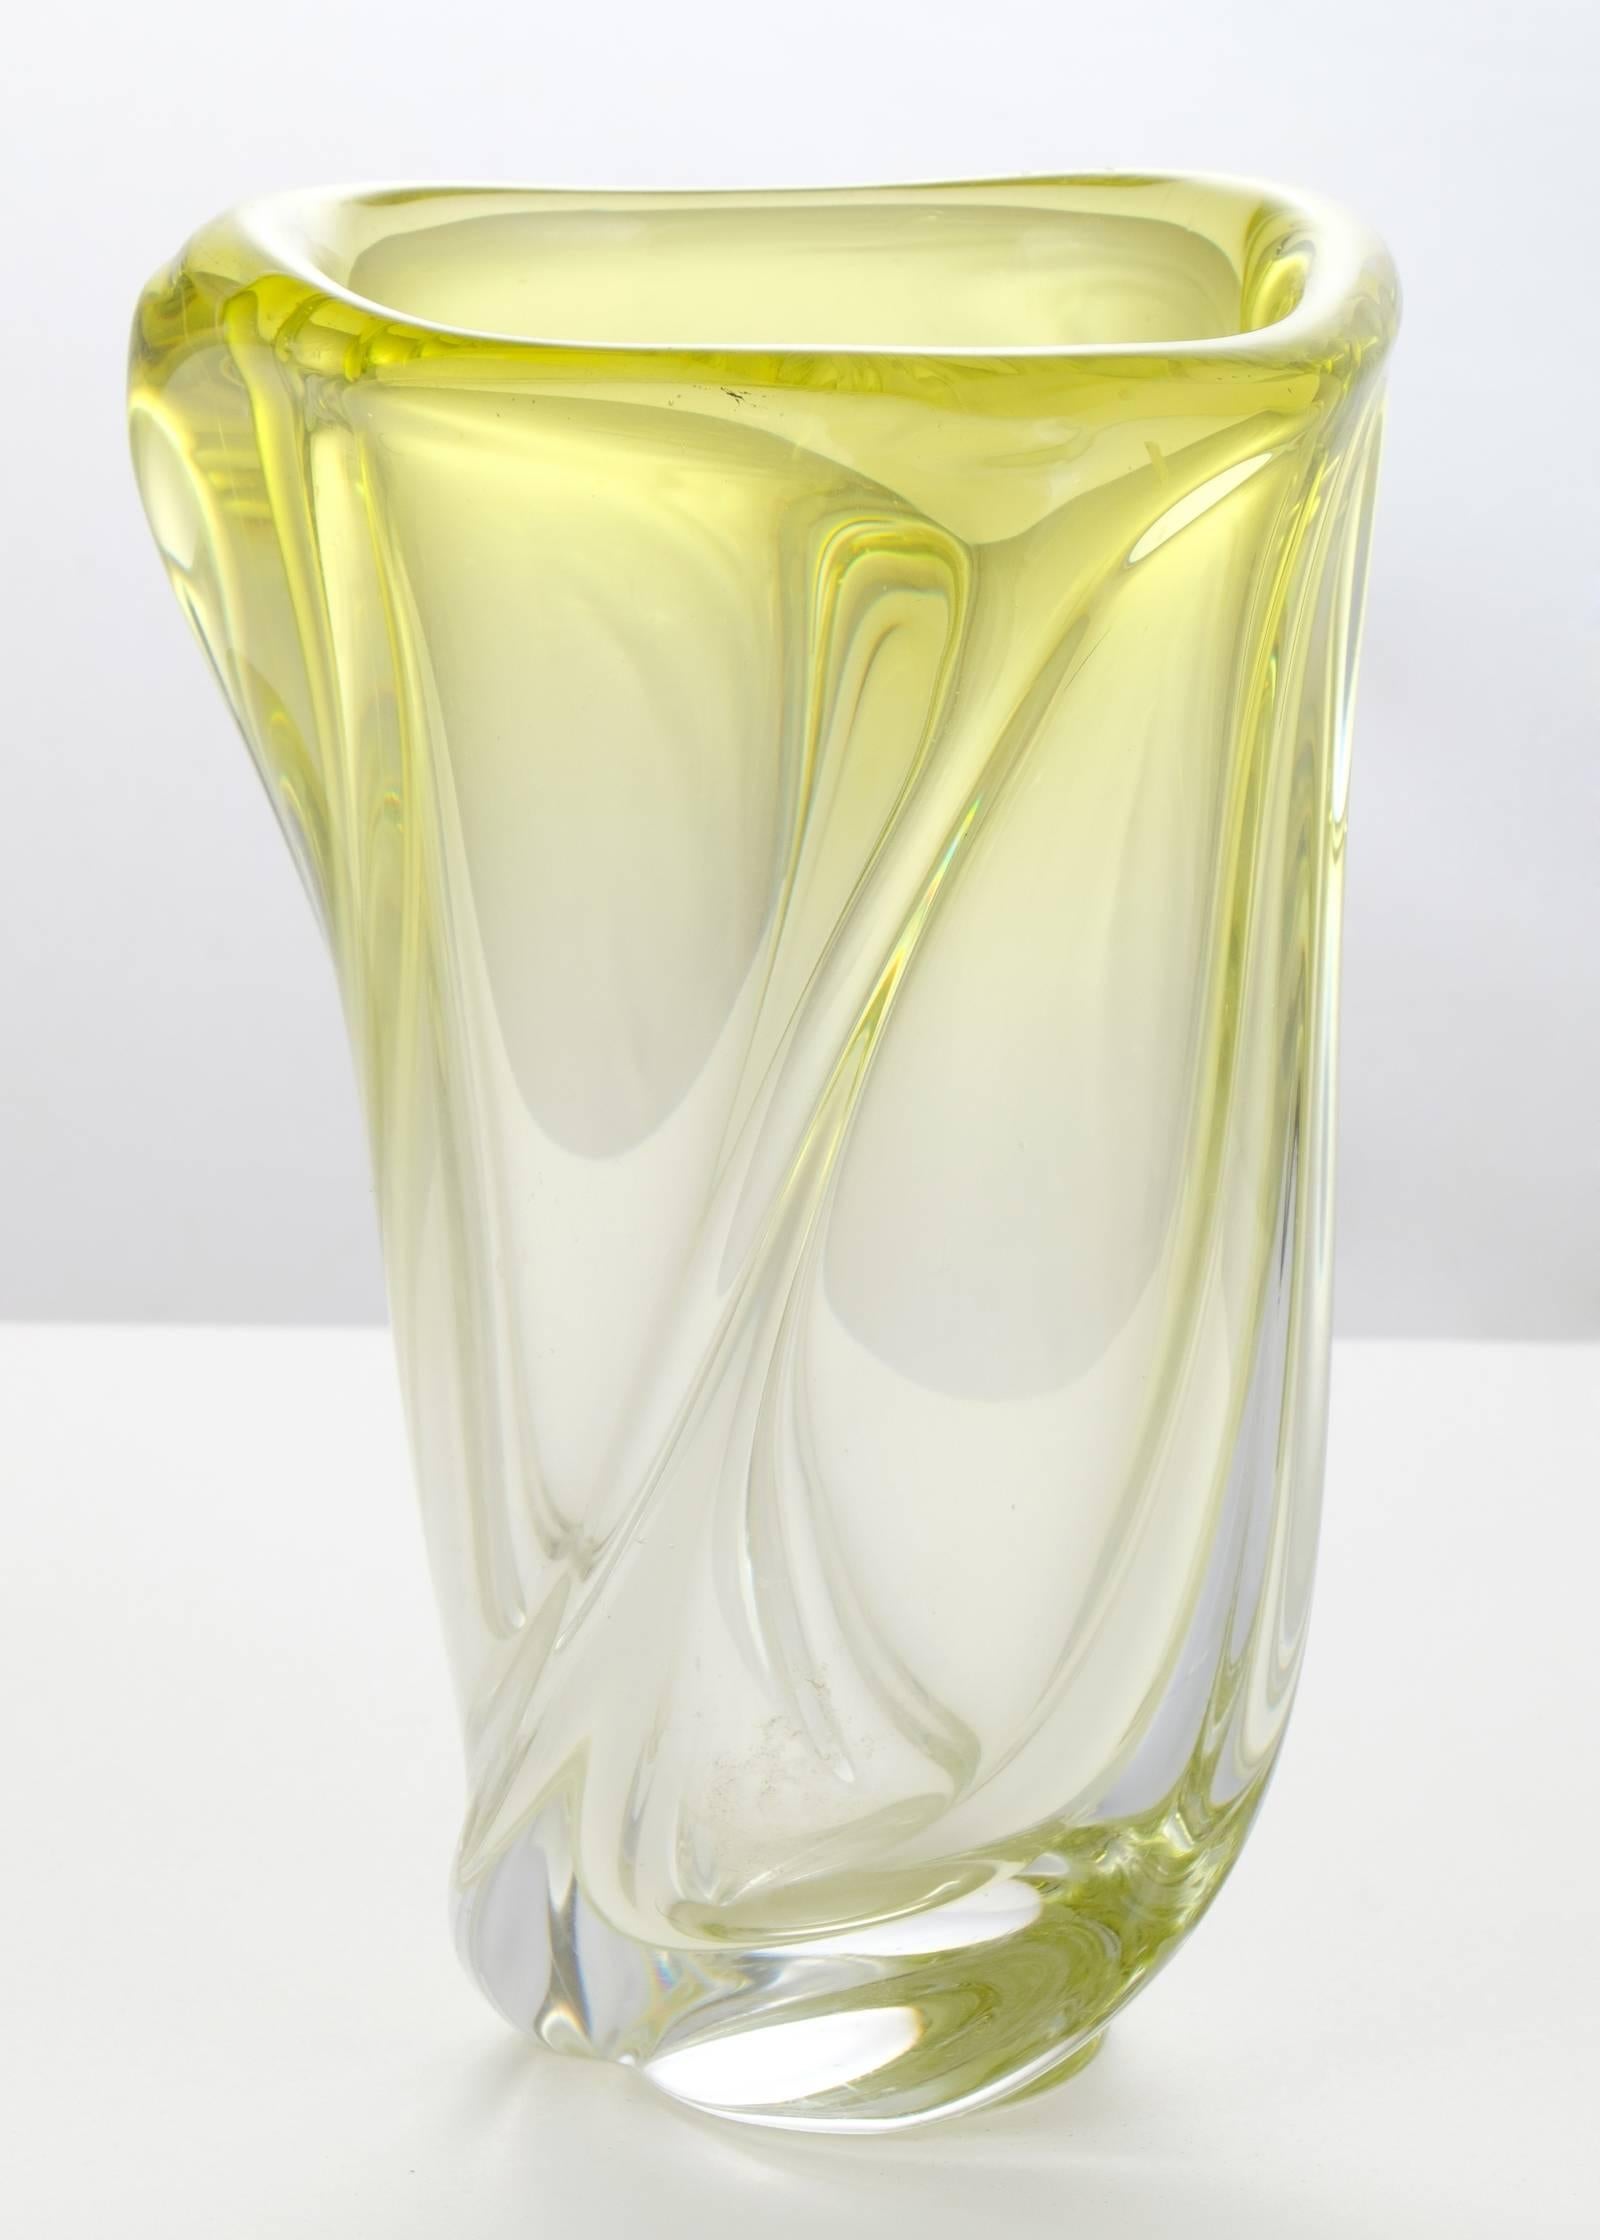 Italian Murano glass vase in a thick, handblown glass fading from citron to clear in color.